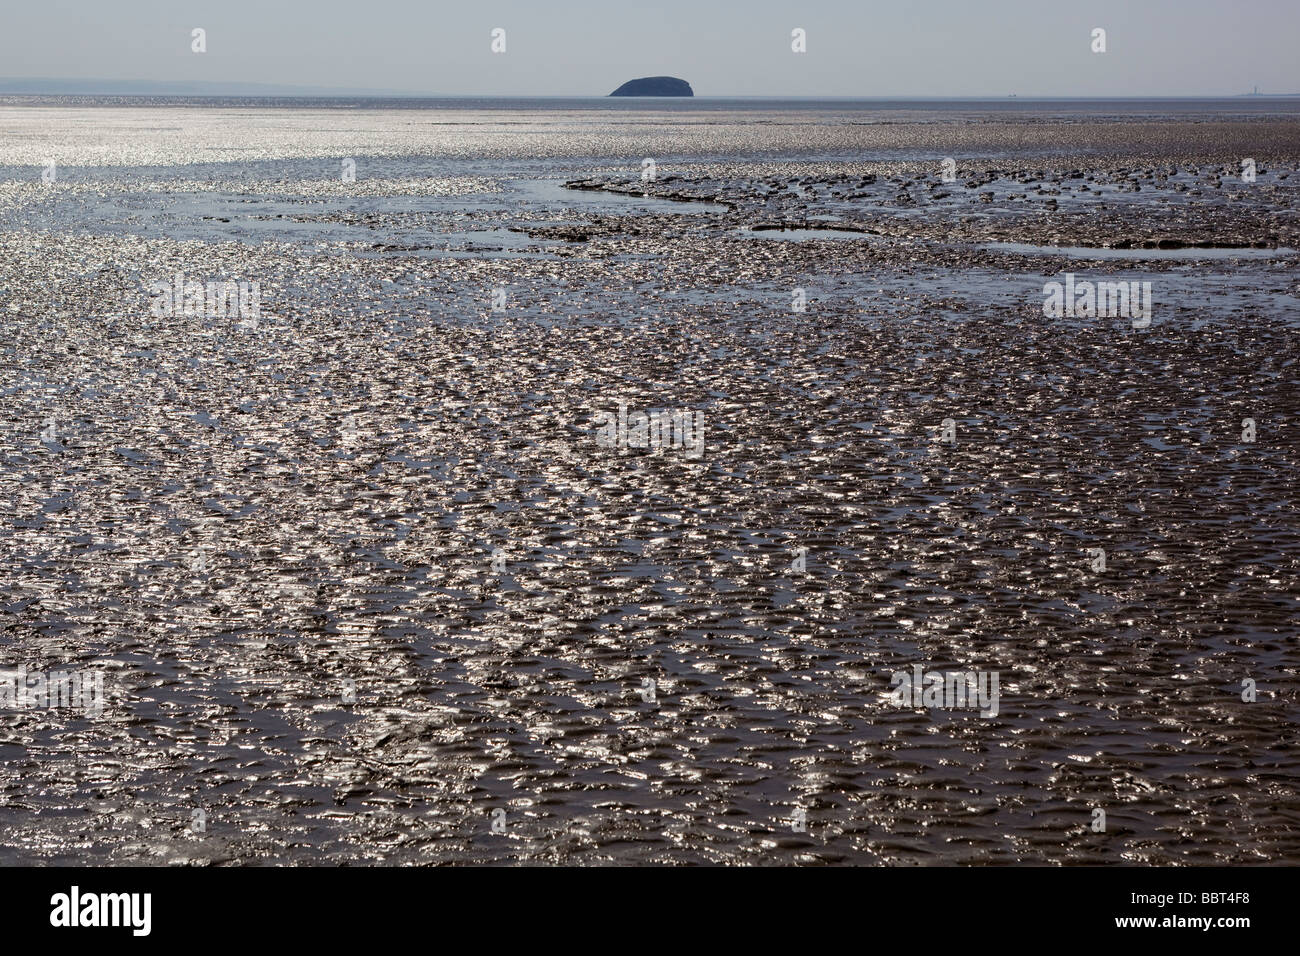 View to Steep Holm Island from the beach at Weston Super Mare Somerset England Stock Photo